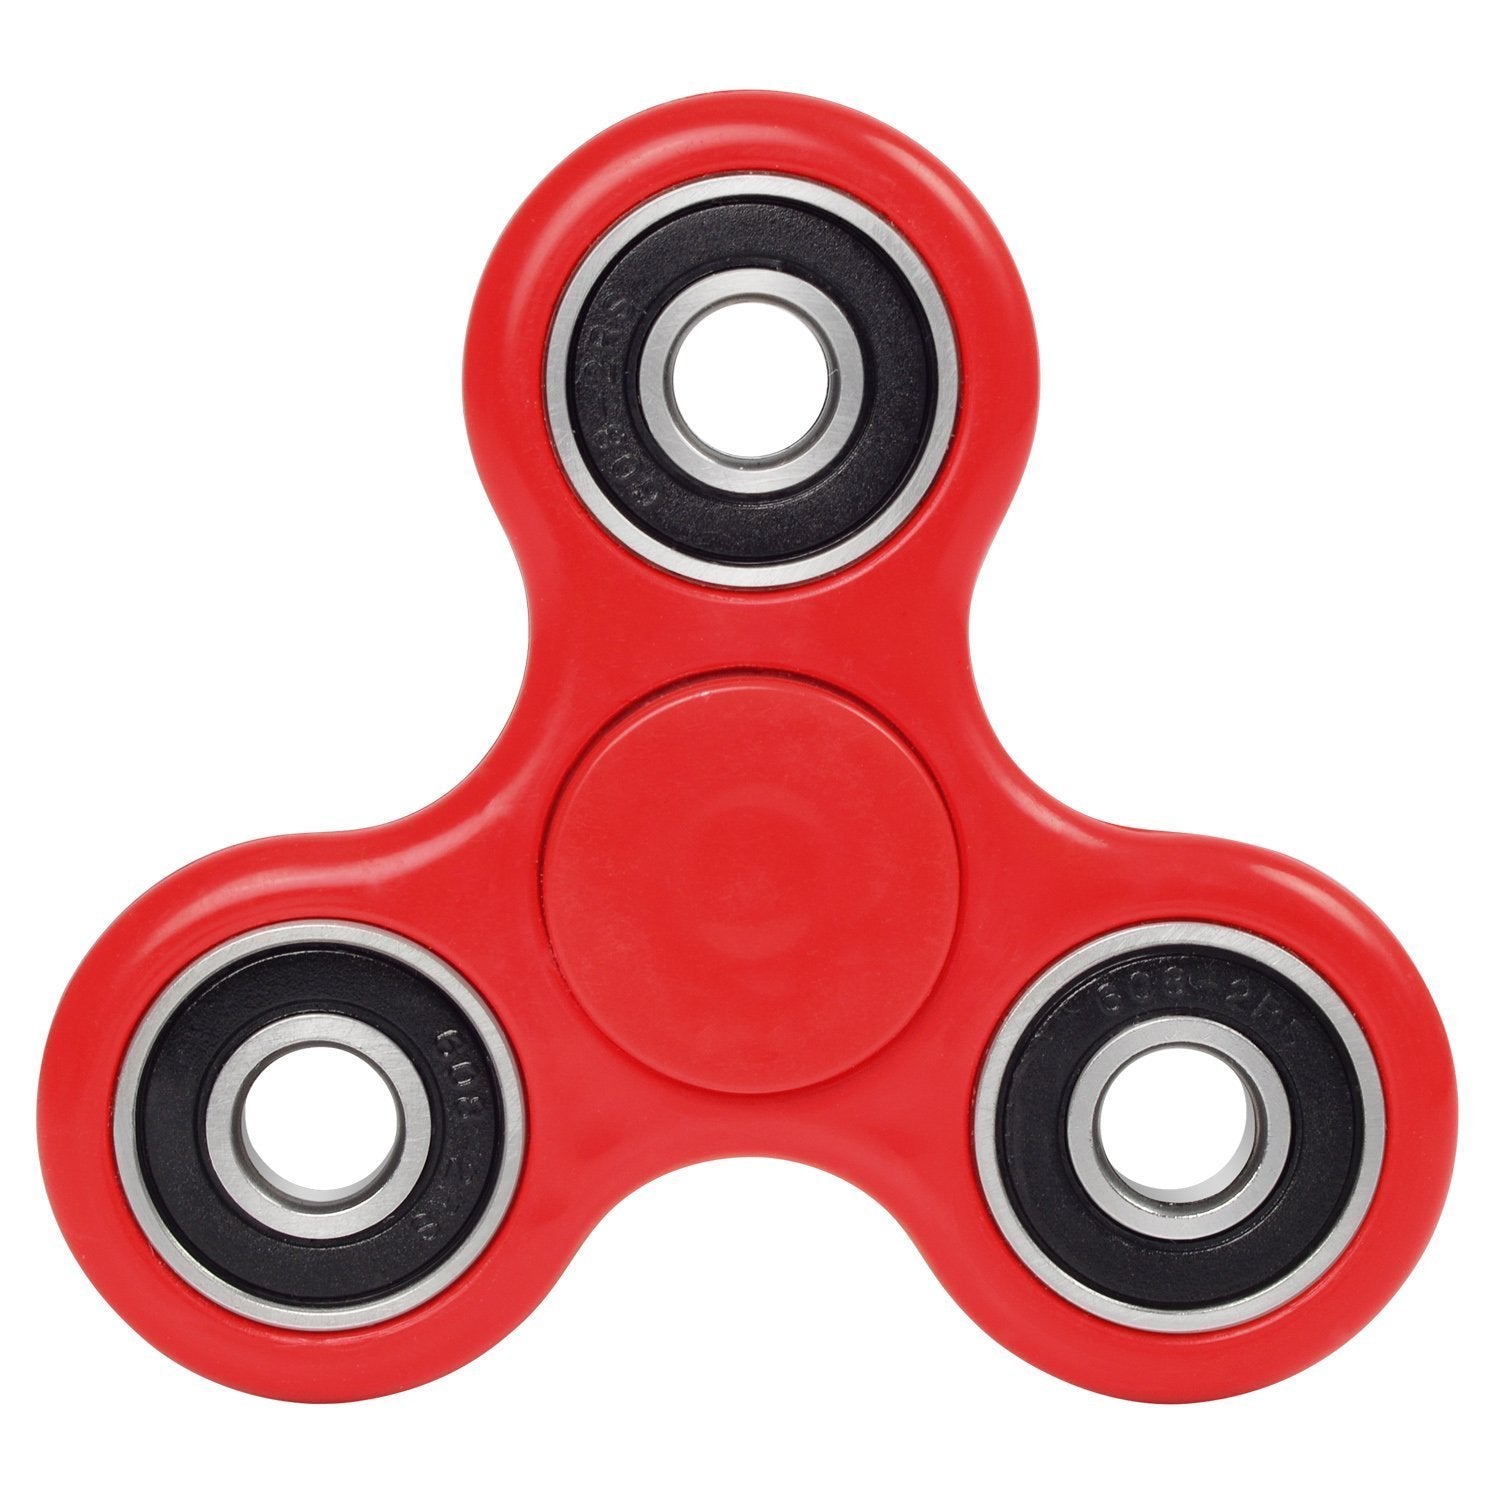 LUVVITT Fidget Spinner Premium Toy for Stress Relief and Focus - Red